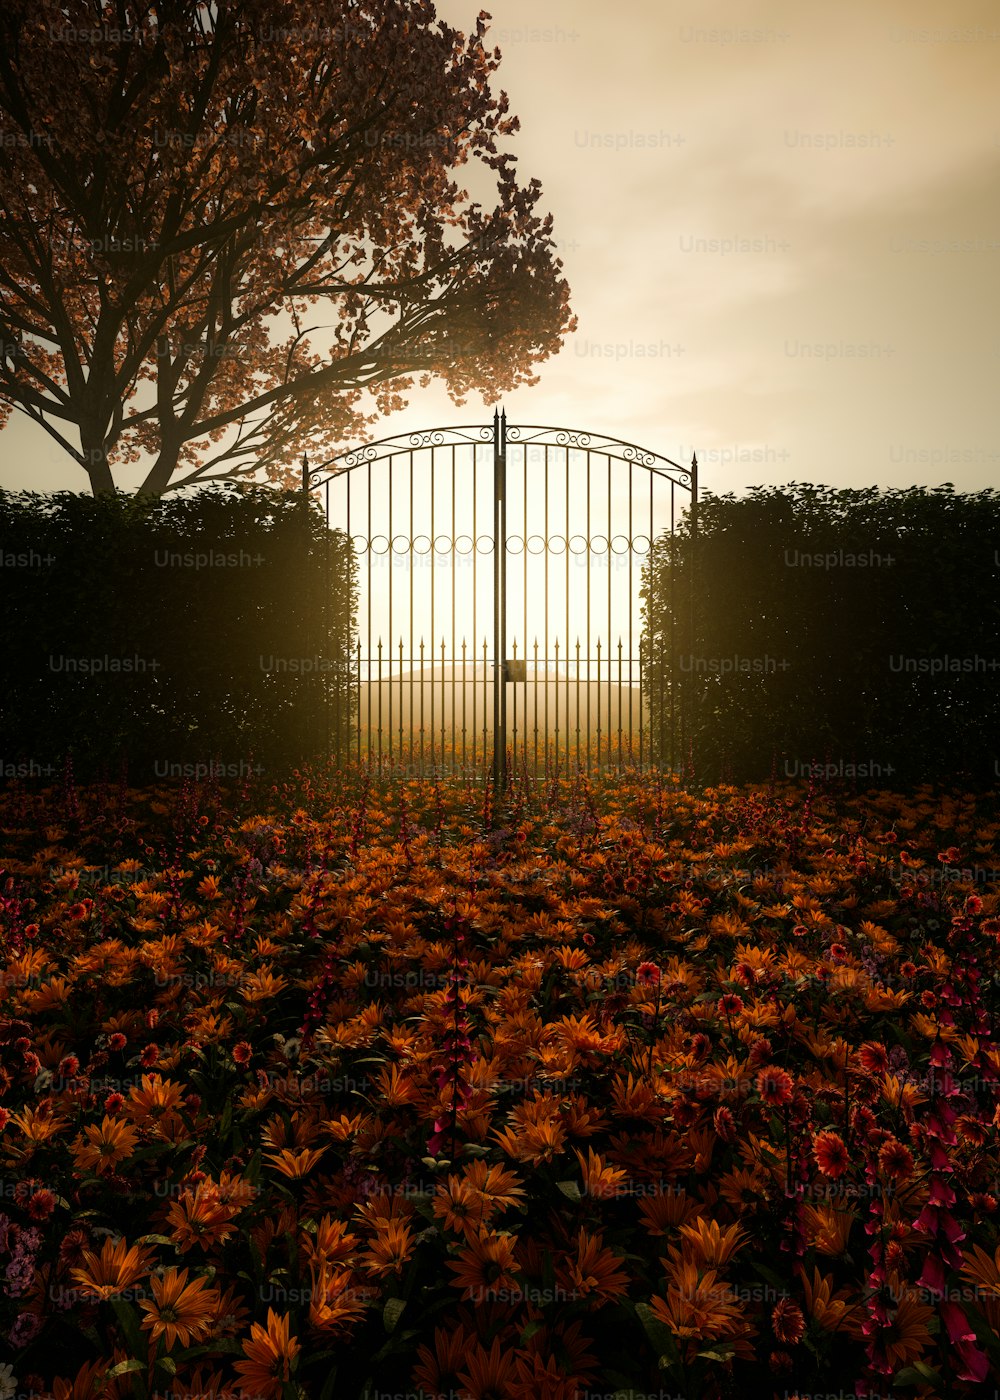 the sun is setting behind a gate in a field of flowers